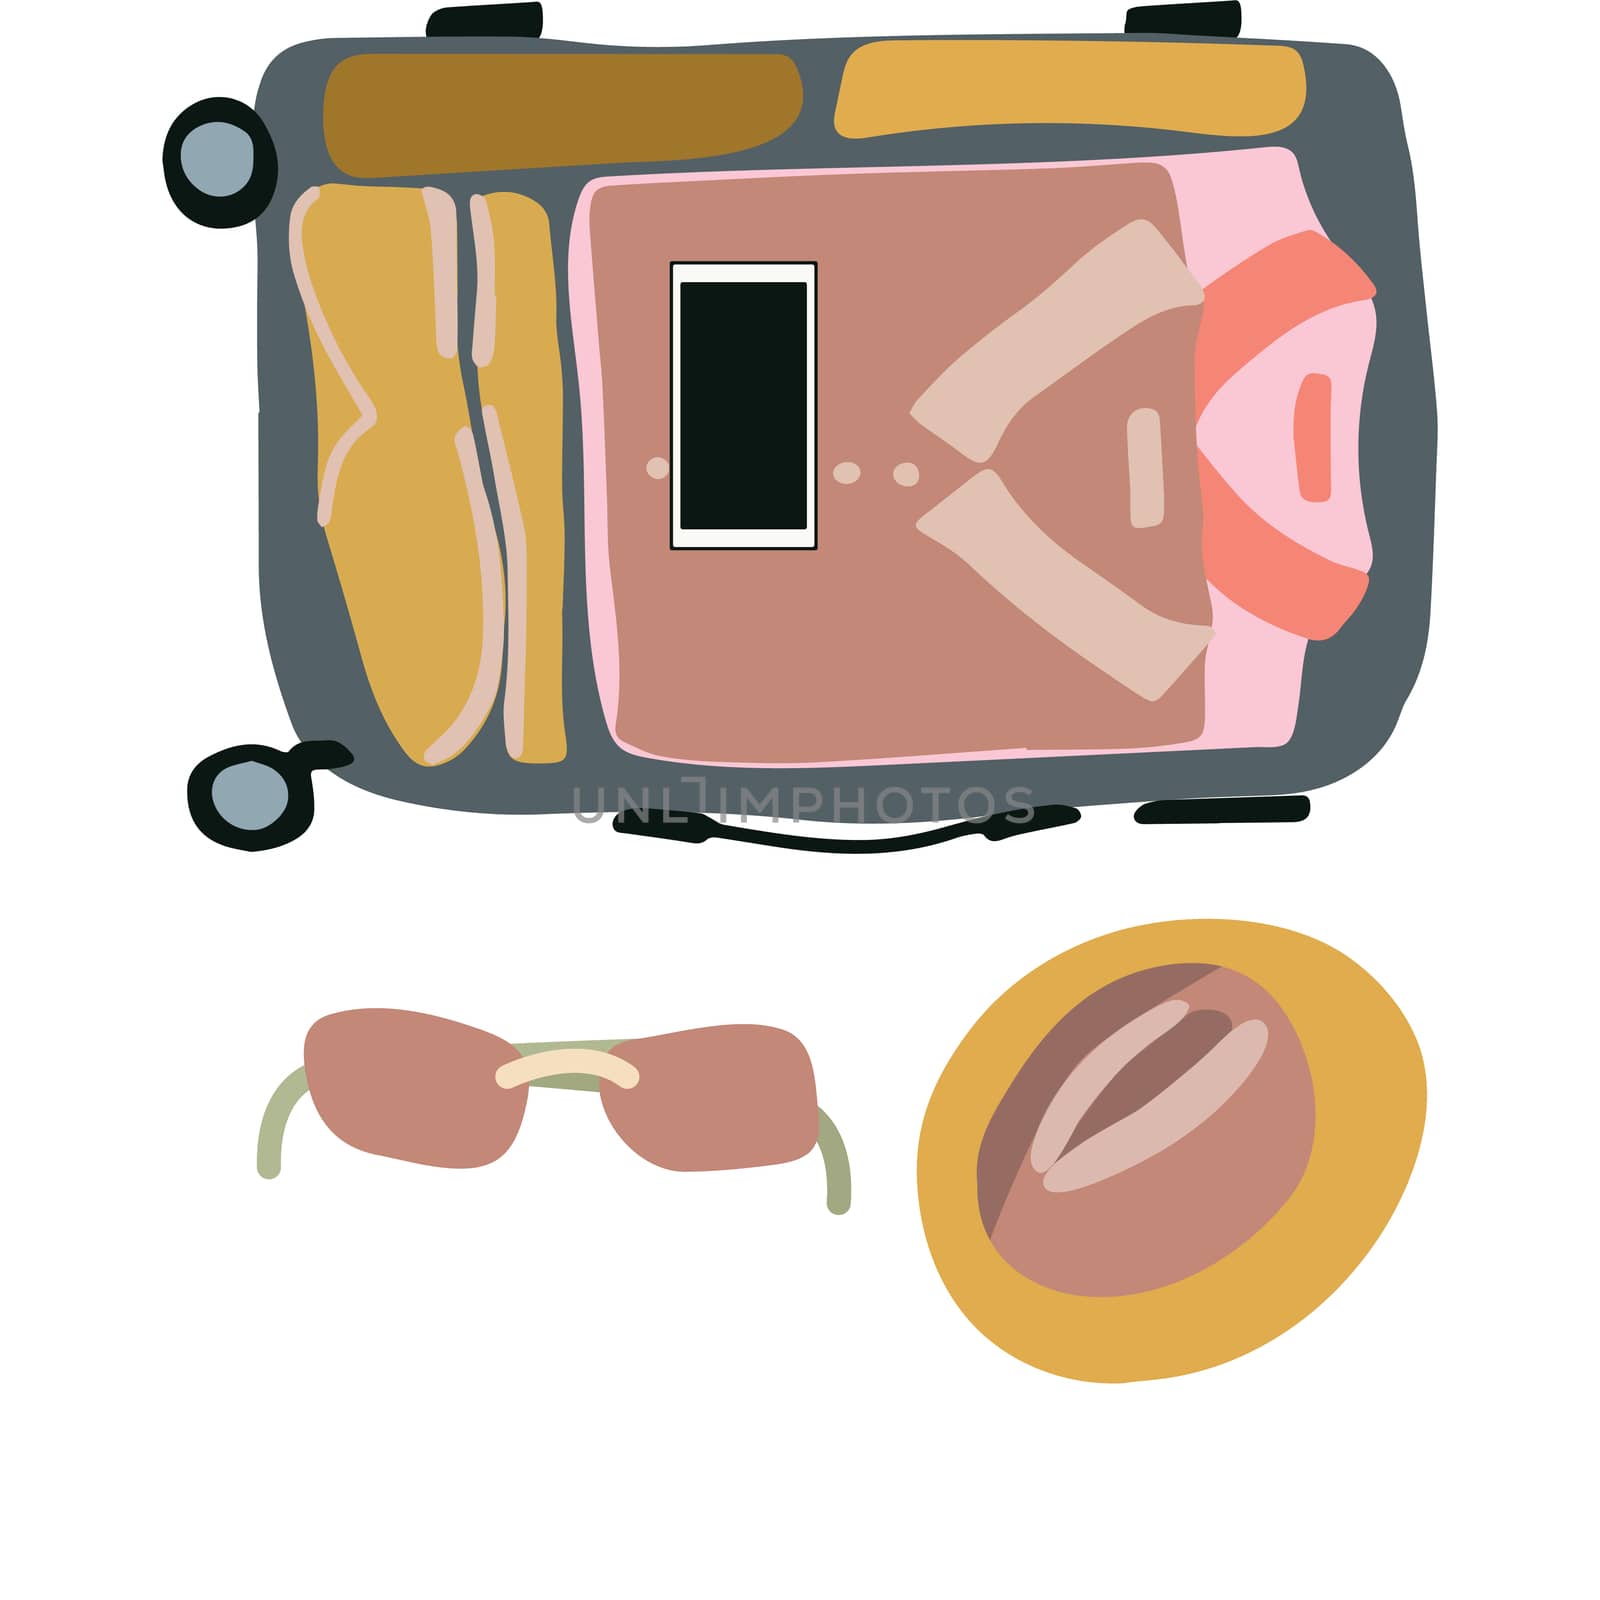 Top view luggage with hat and sunglasses by Nata_Prando